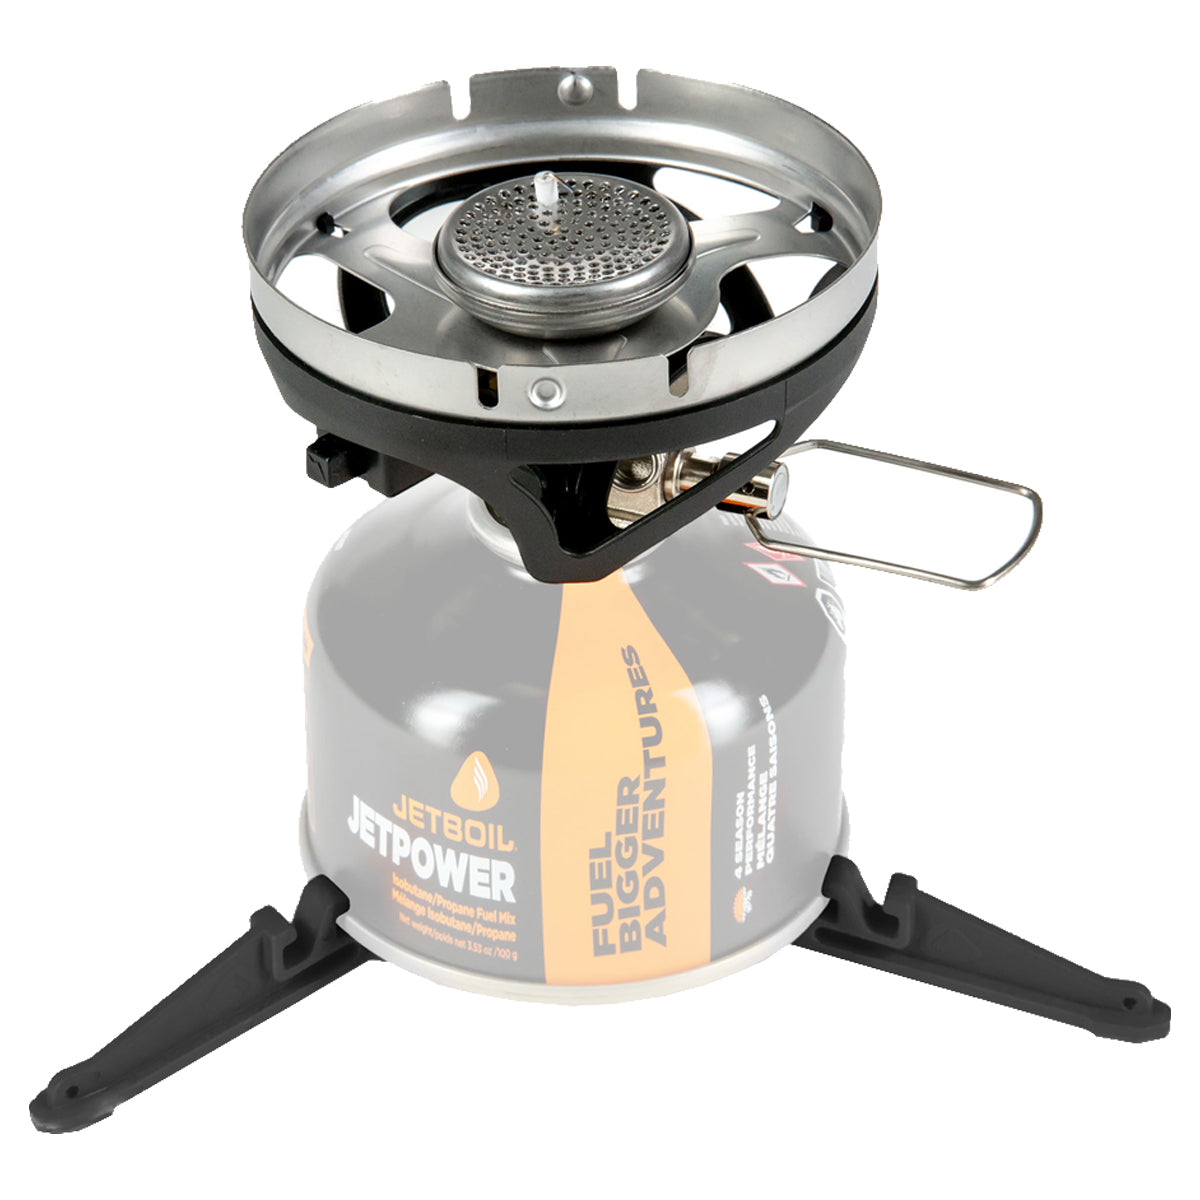 Jetboil MiniMo Stove System in  by GOHUNT | Jetboil - GOHUNT Shop